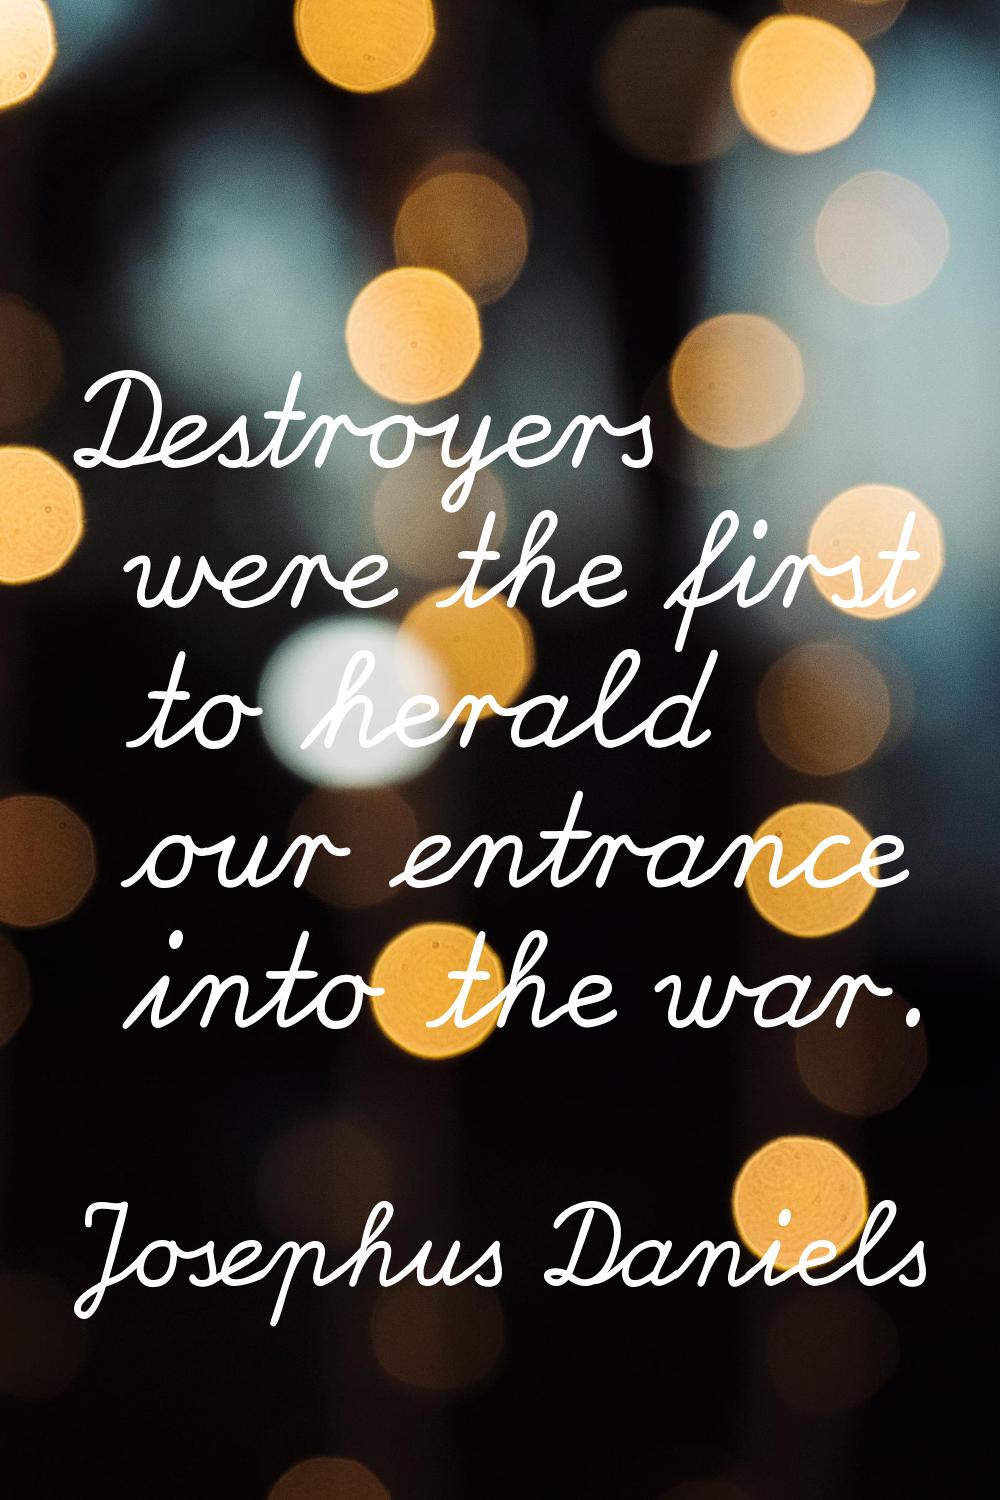 Destroyers were the first to herald our entrance into the war.